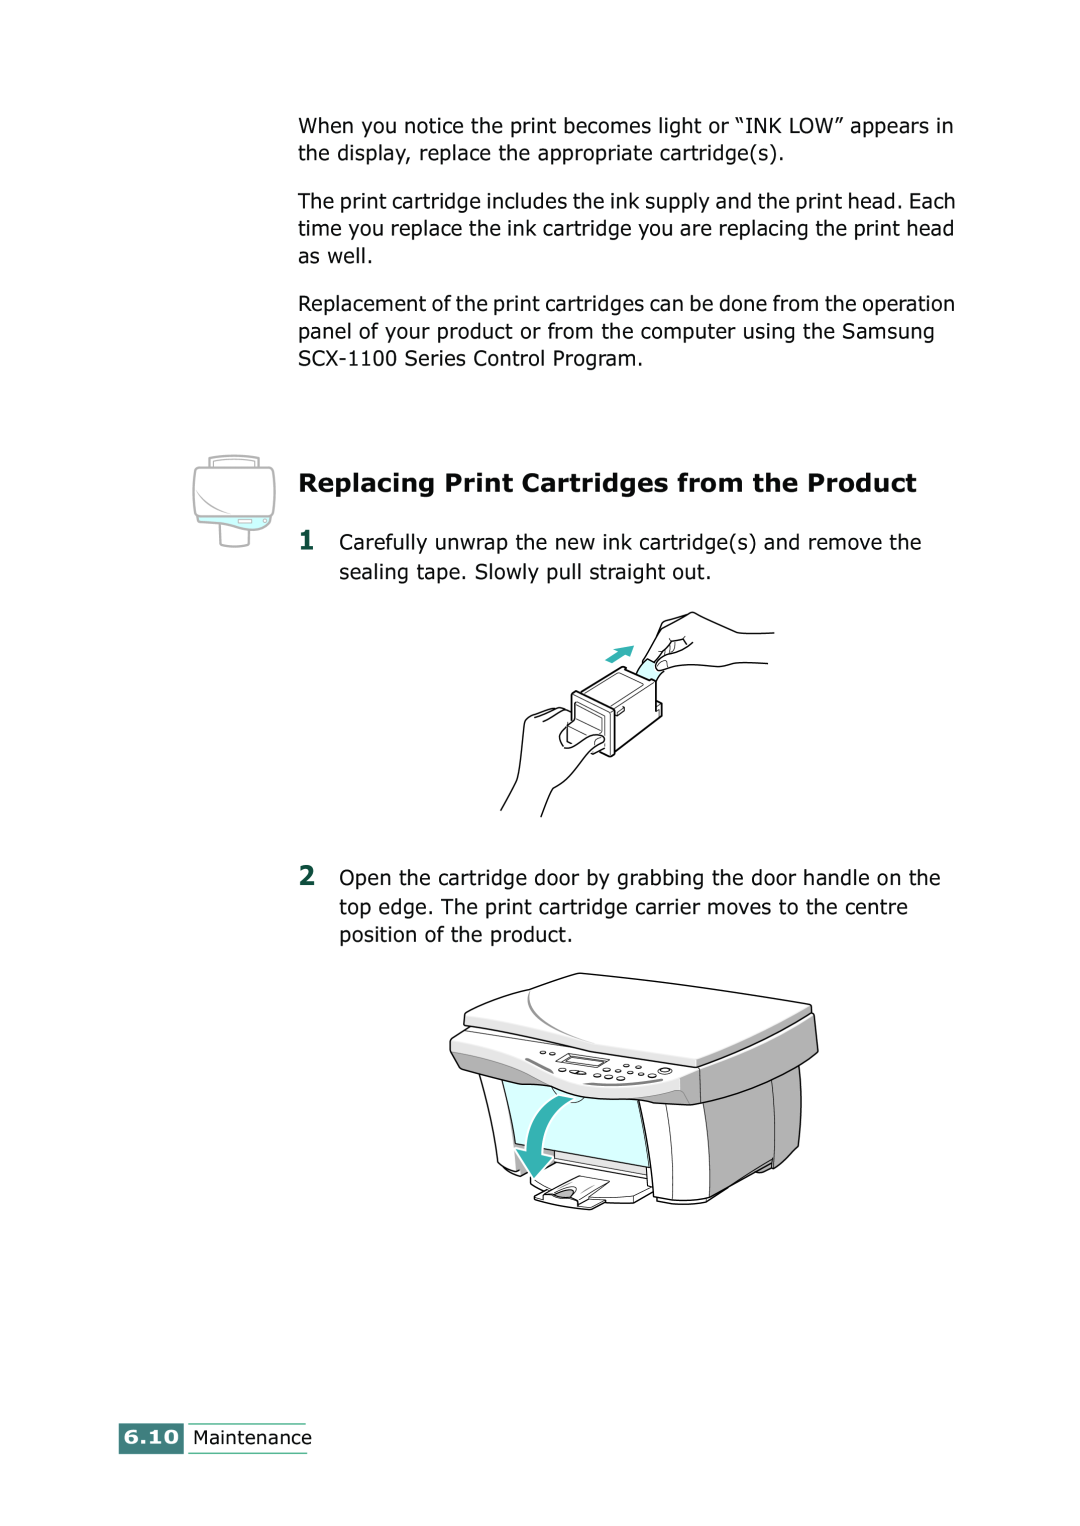 Samsung SCX-1100 manual Replacing Print Cartridges from the Product, Maintenance 